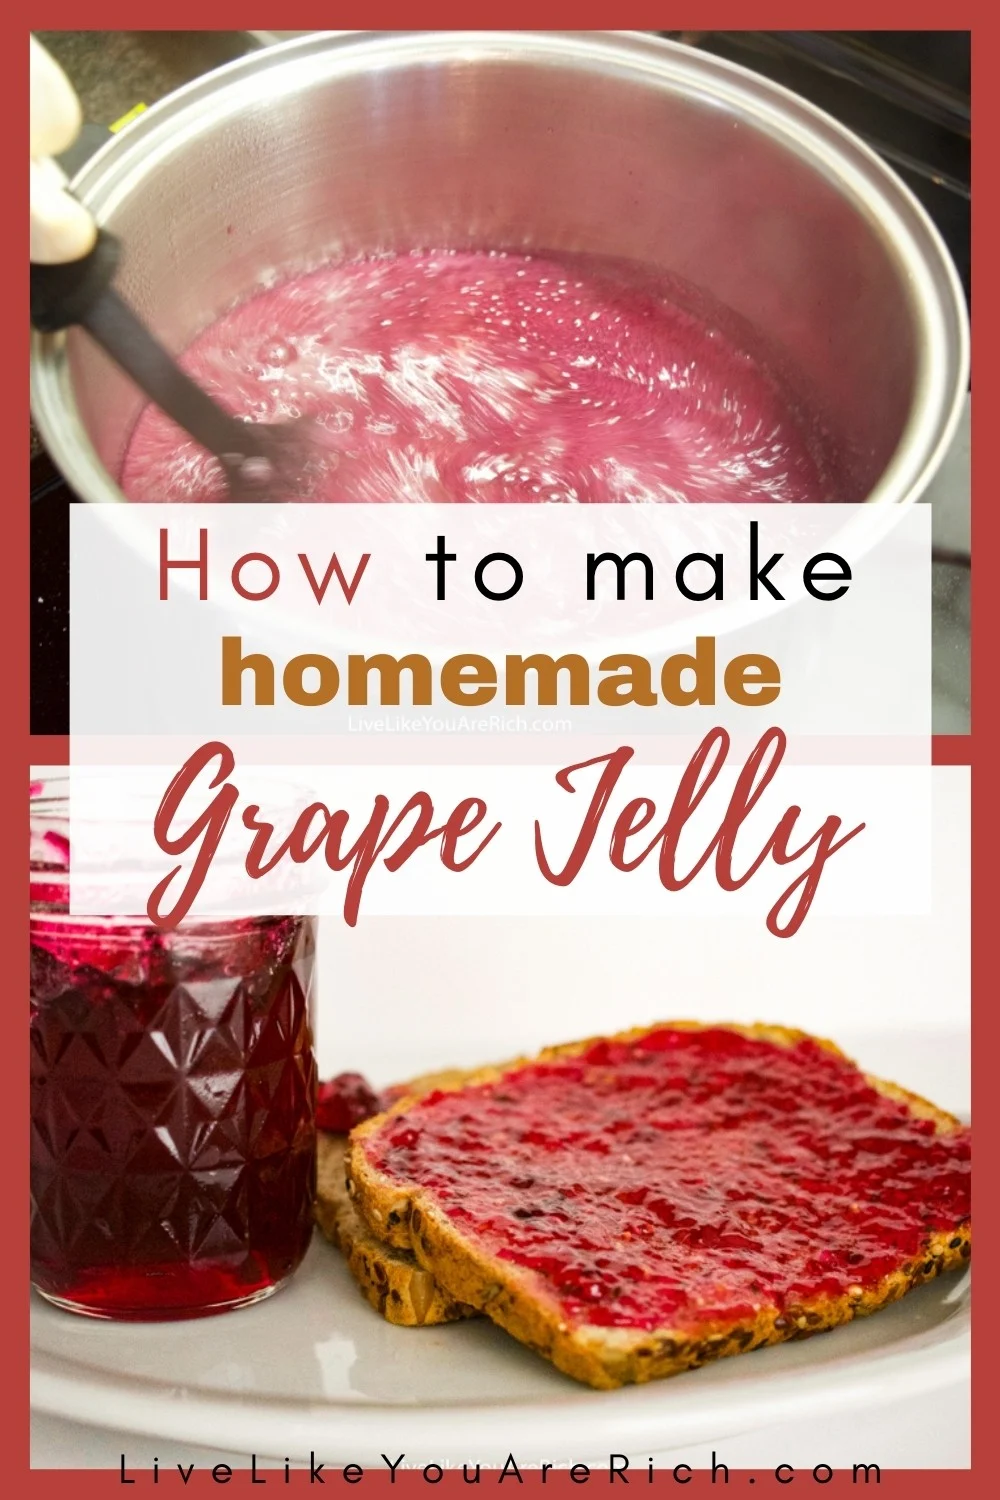 This is my favorite jelly! It is so flavorful, sweet, and delicious! It is easy and quick to make, especially considering the fact that the extras will store for up to a year. I’d highly recommend trying this fantastic recipe. #grapejelly 